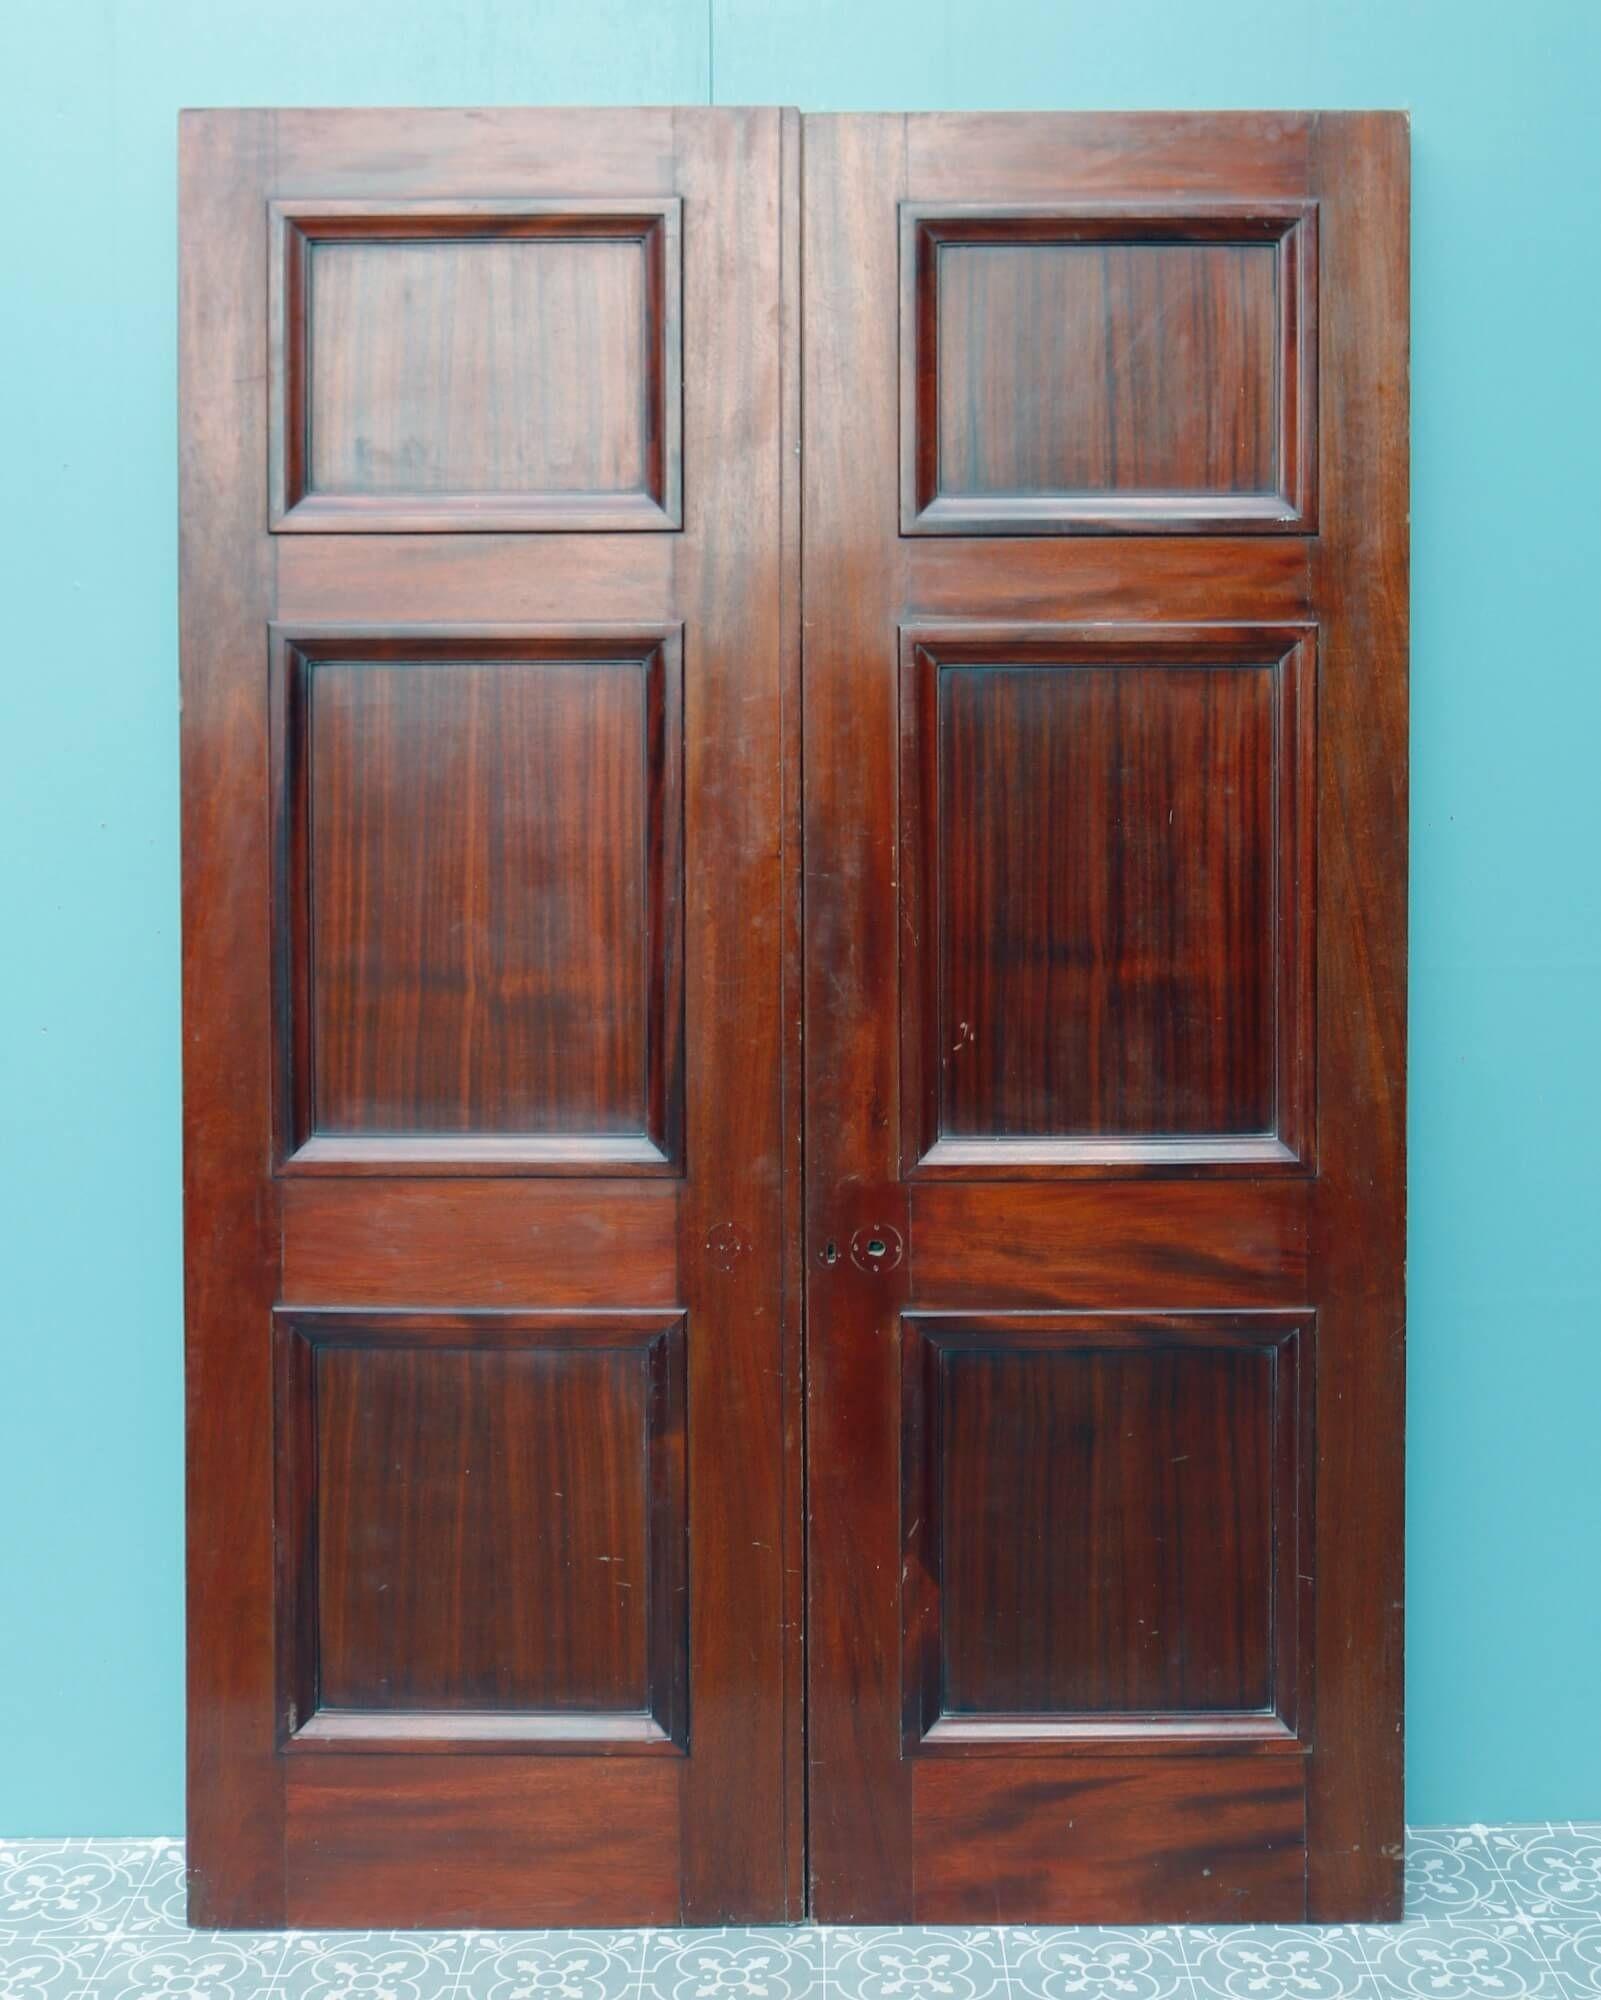 A beautiful, good quality set of 1930s reclaimed mahogany internal dividing doors with an original finish. These reclaimed double doors make a smart set of interior doors for a period property or townhouse with a handsome natural grain and 6-panels